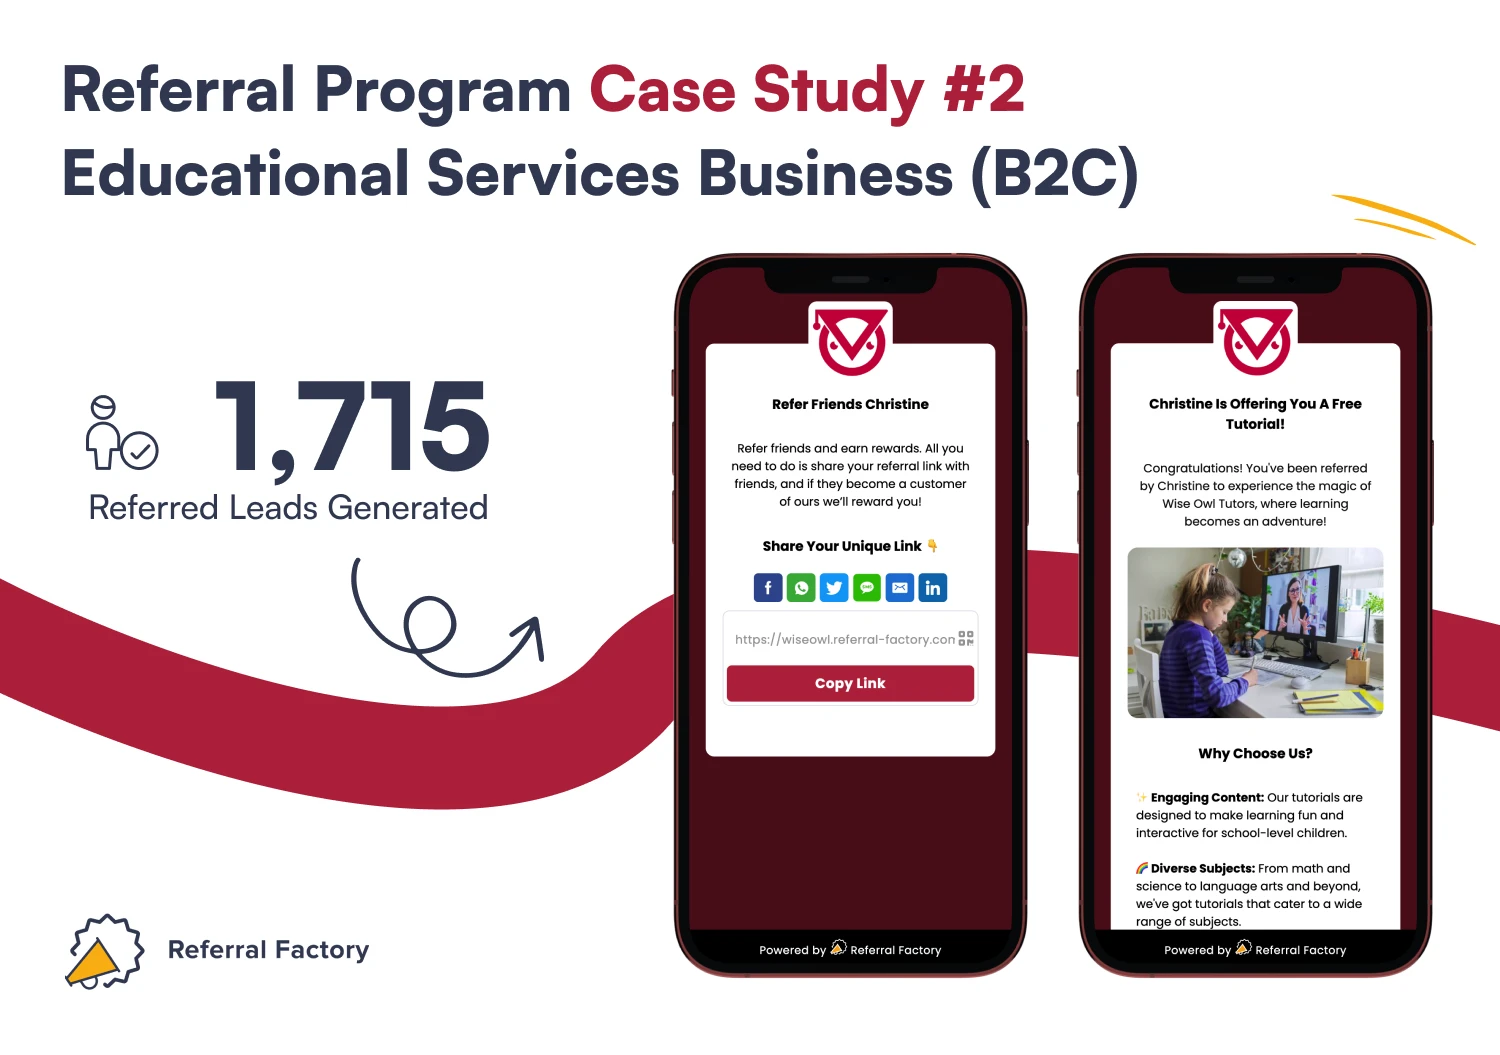 referral program case study educational services business referral factory